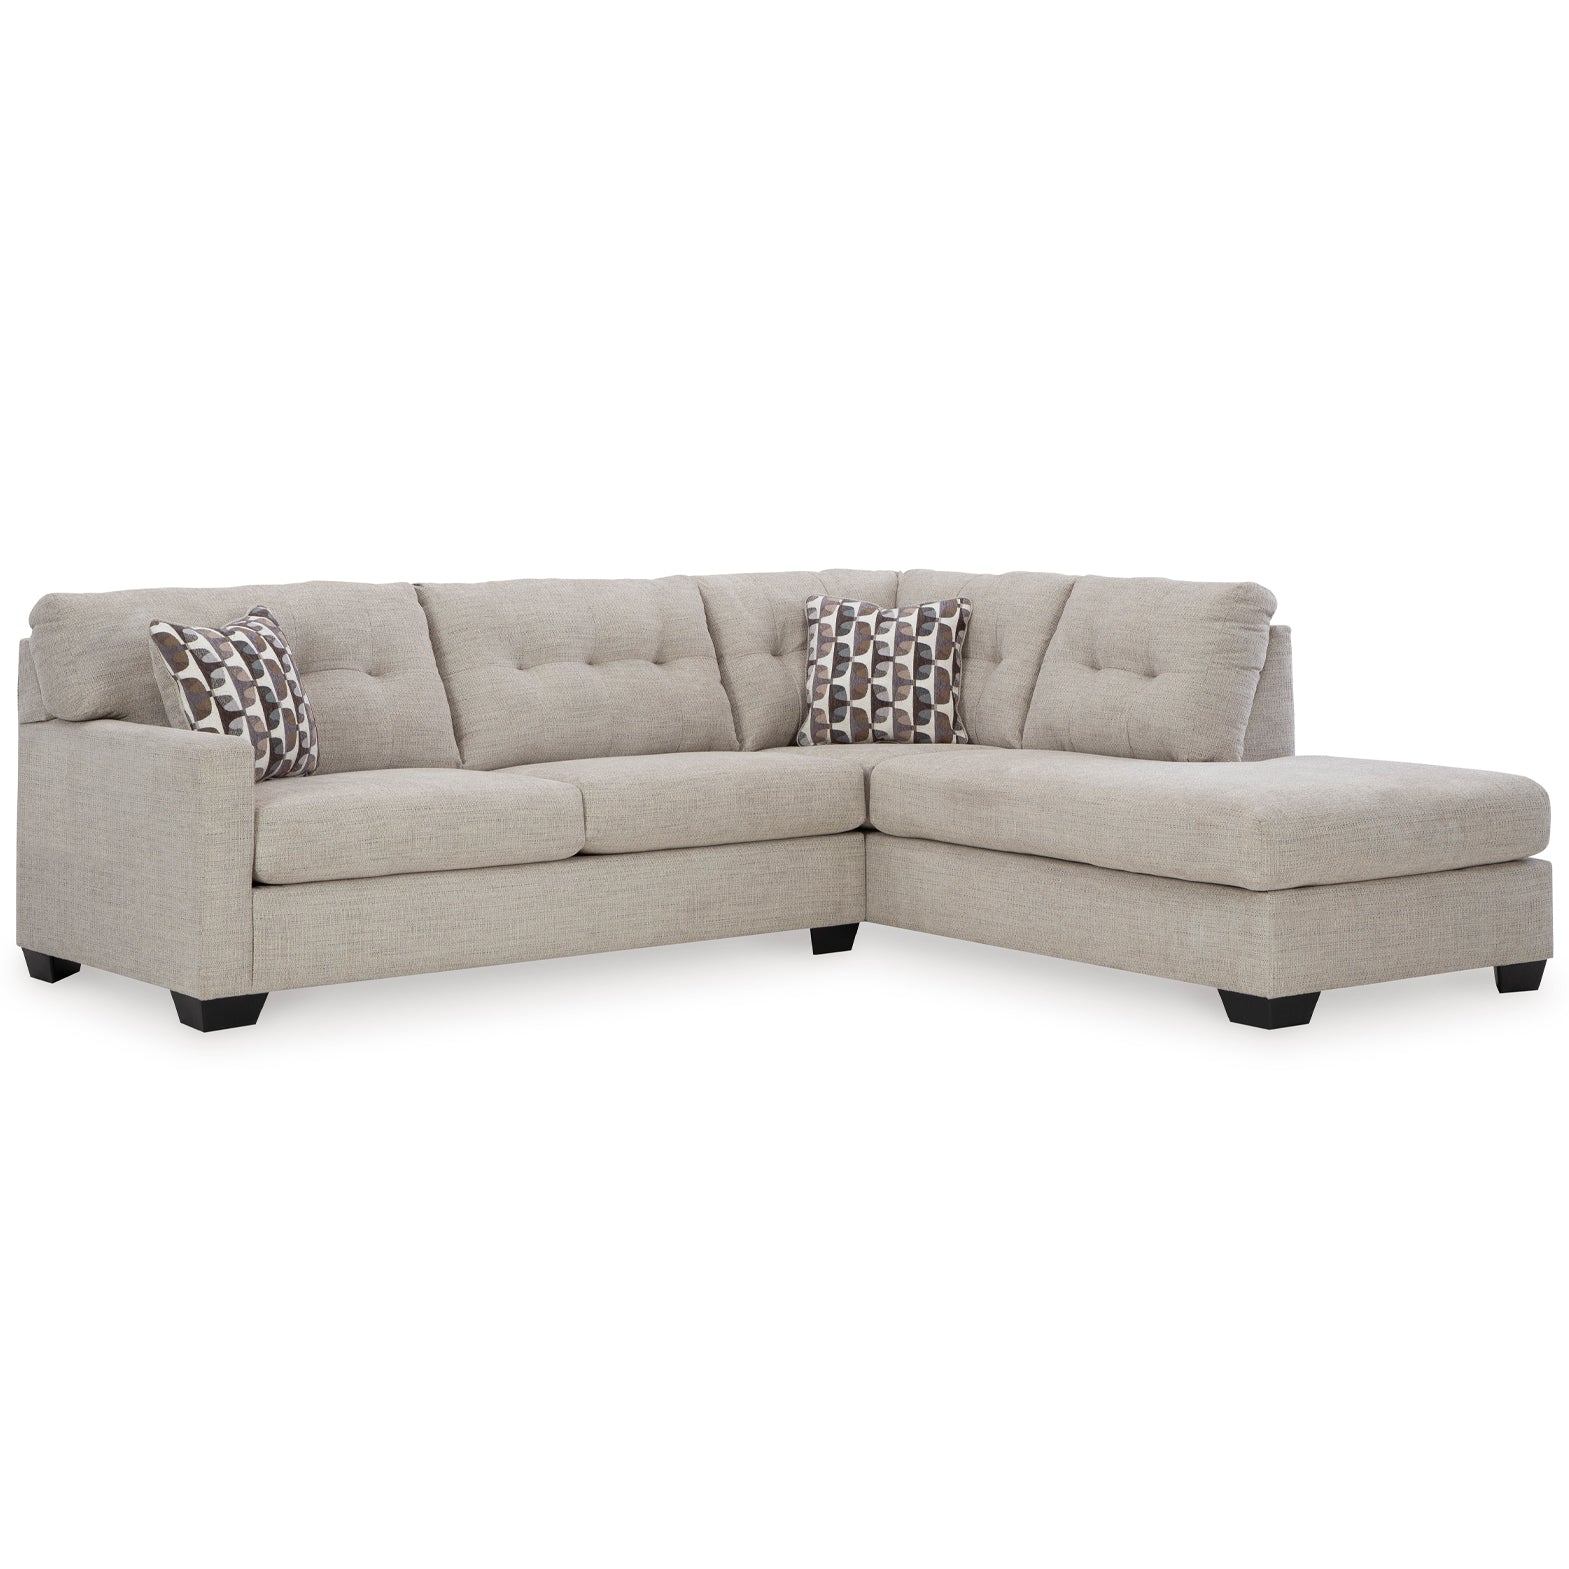 Mahoney 2-Piece Sectional with Chaise in elegant pebble color, perfect for modern Milwaukee apartments